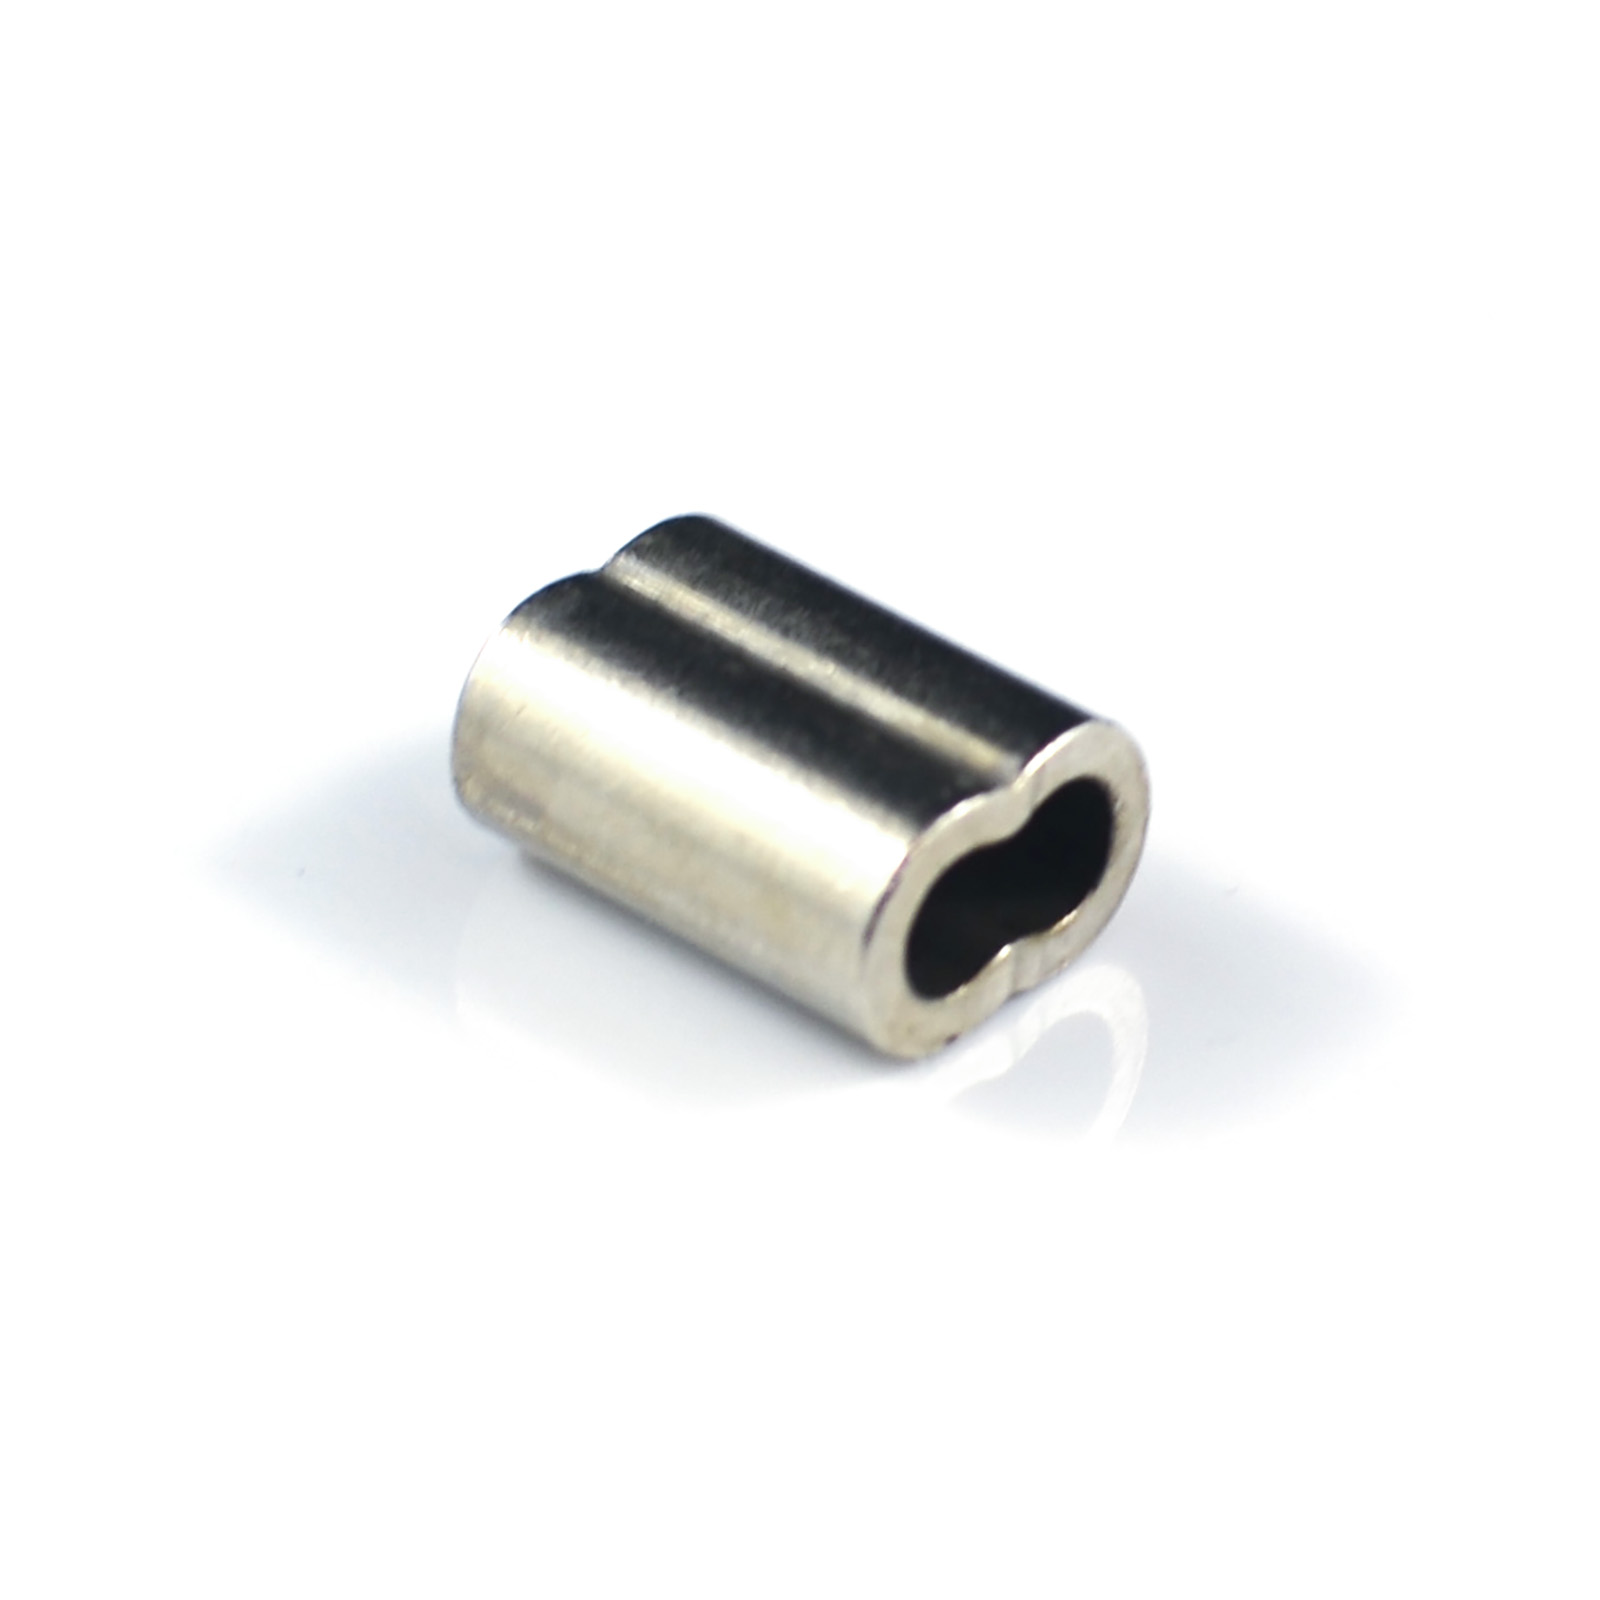 Nickel Plated Copper Ferrule for 2.0mm Wire Rope